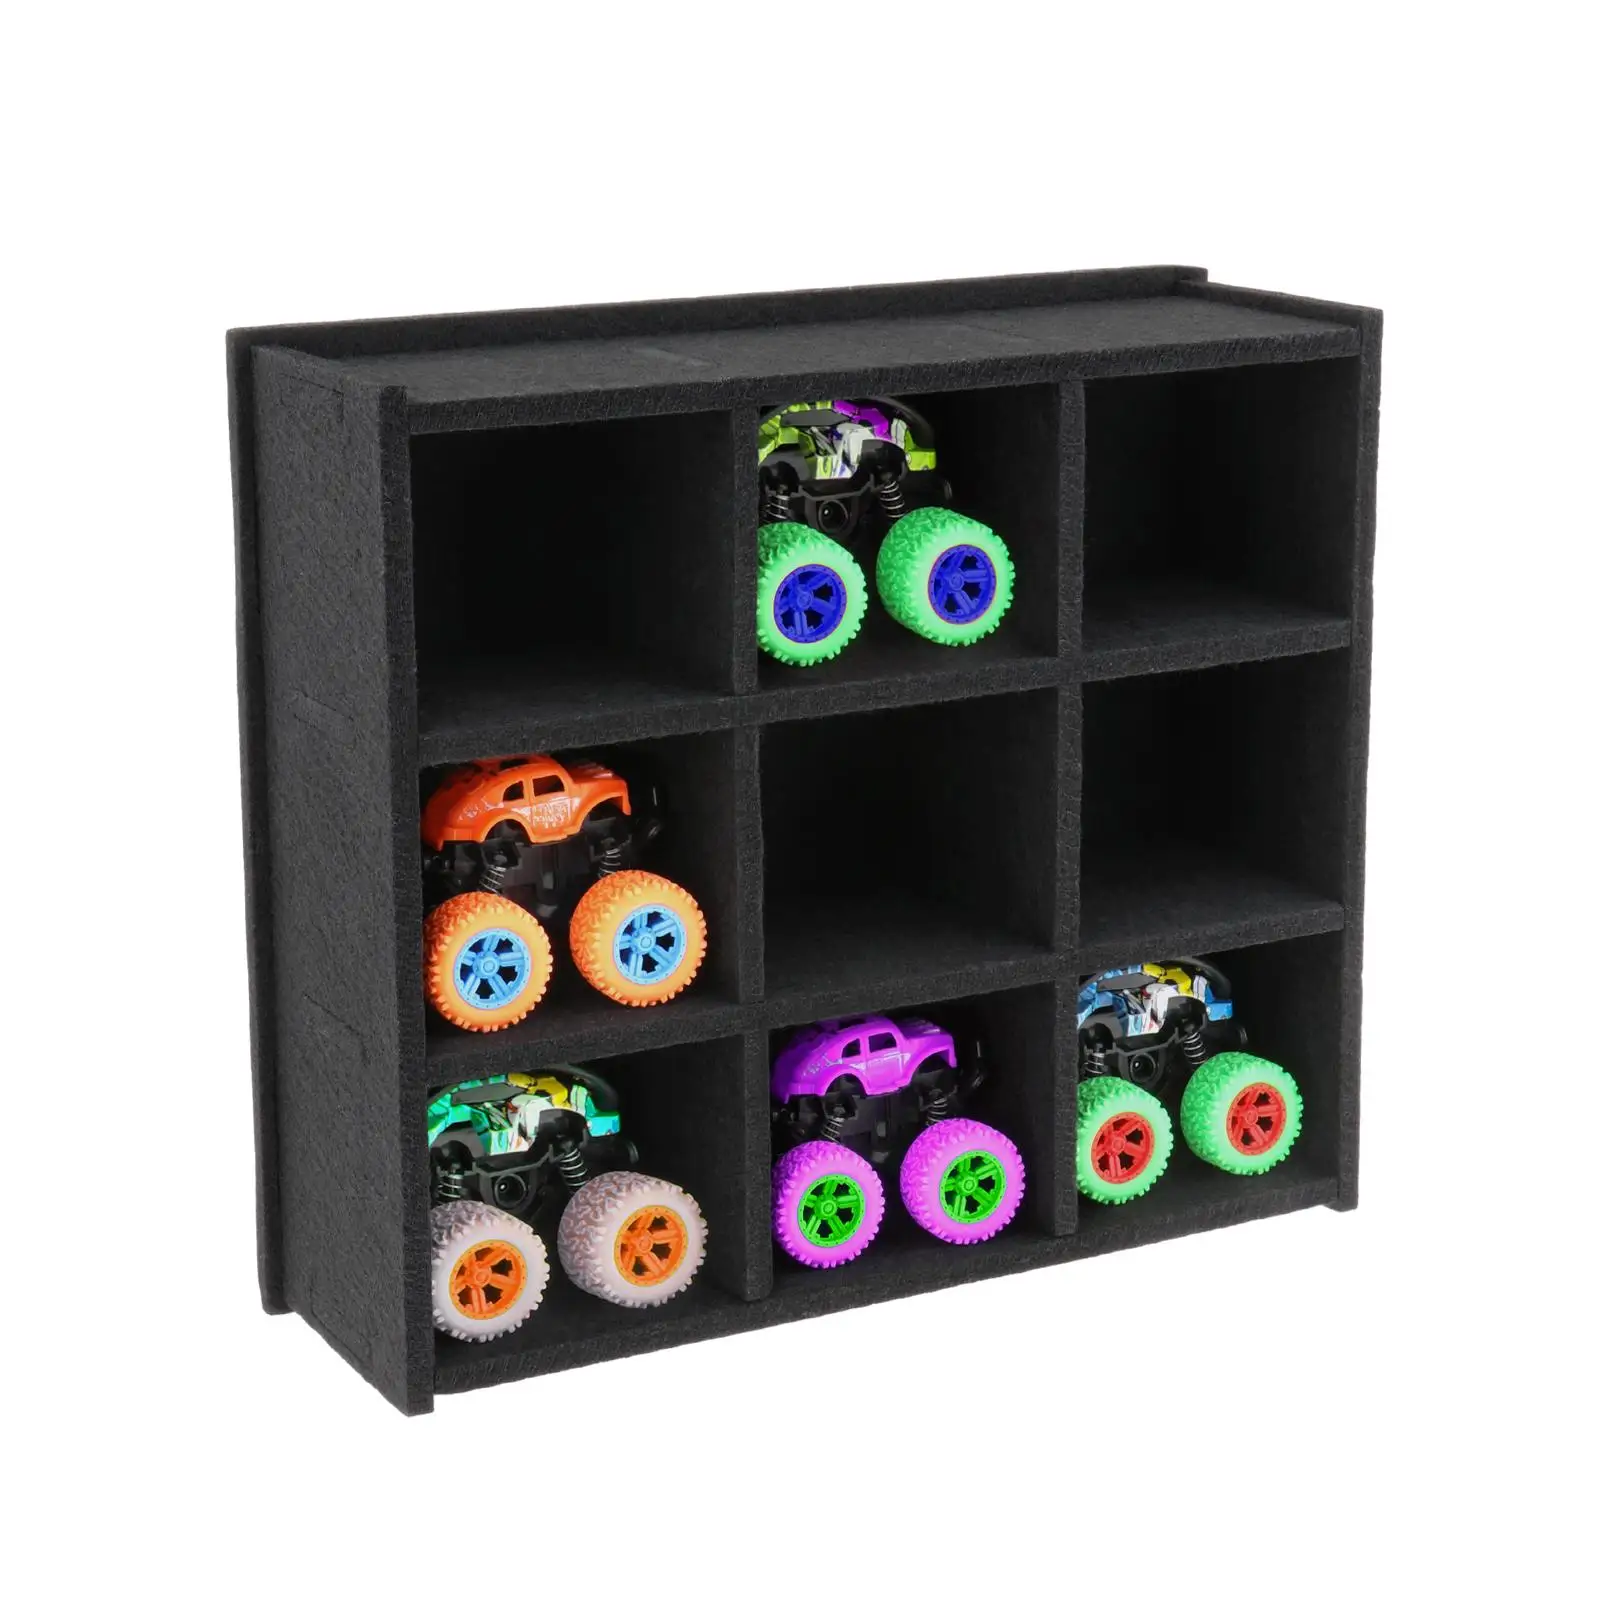 Monster Trucks Toy Wall Mount Display Case with 9 Slots for Displaying